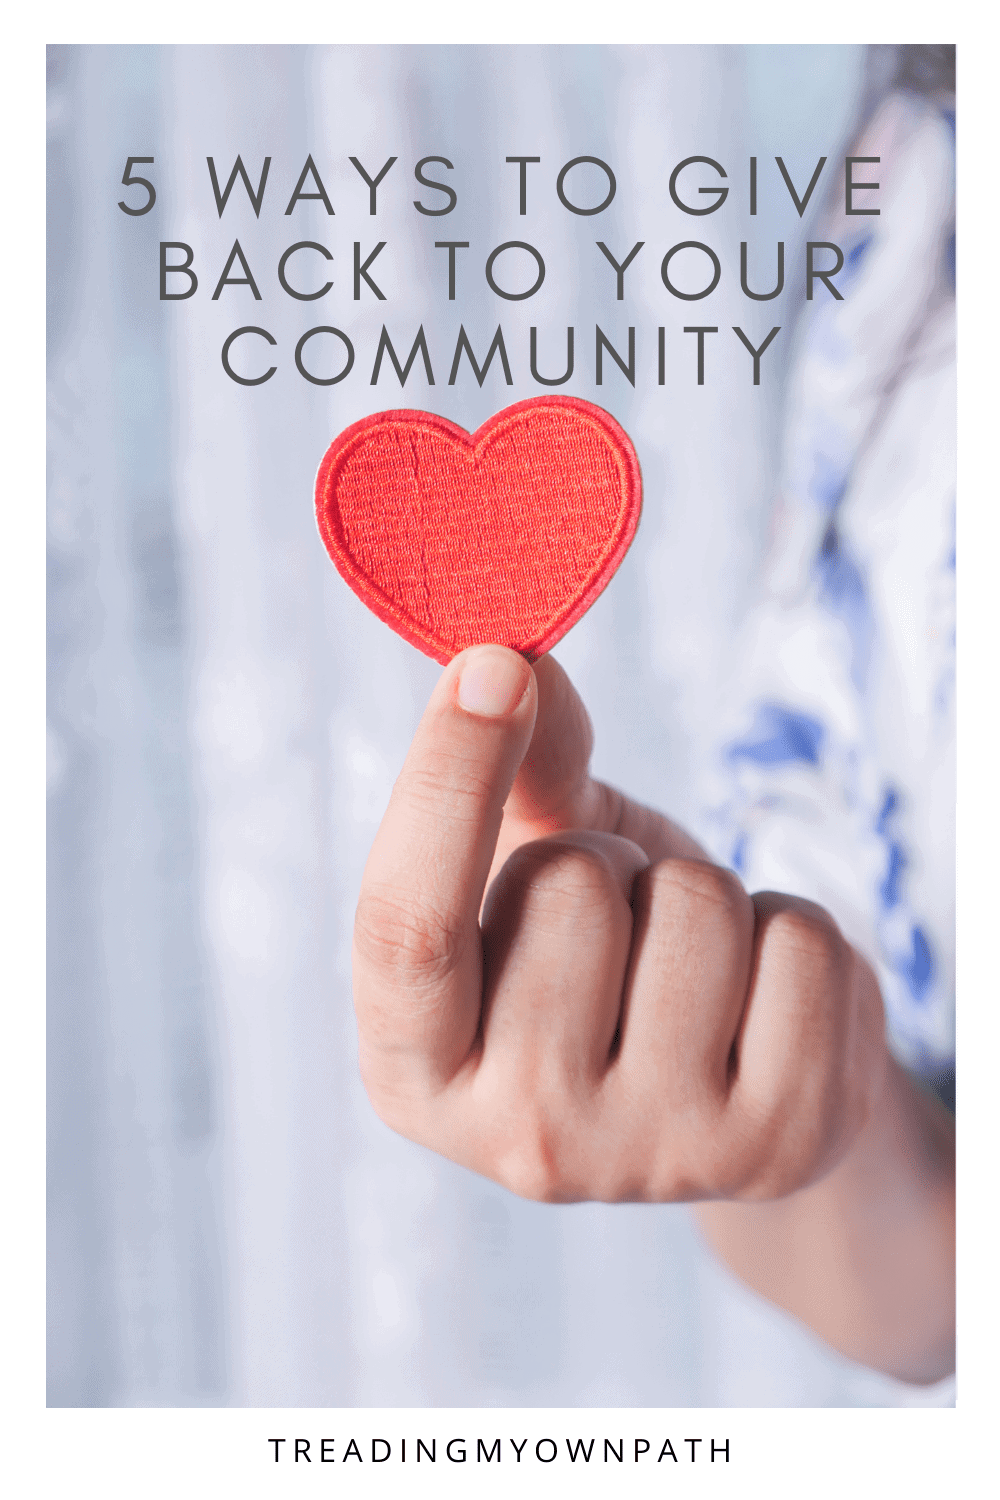 5 ways you can give back to your community (even under lockdown)